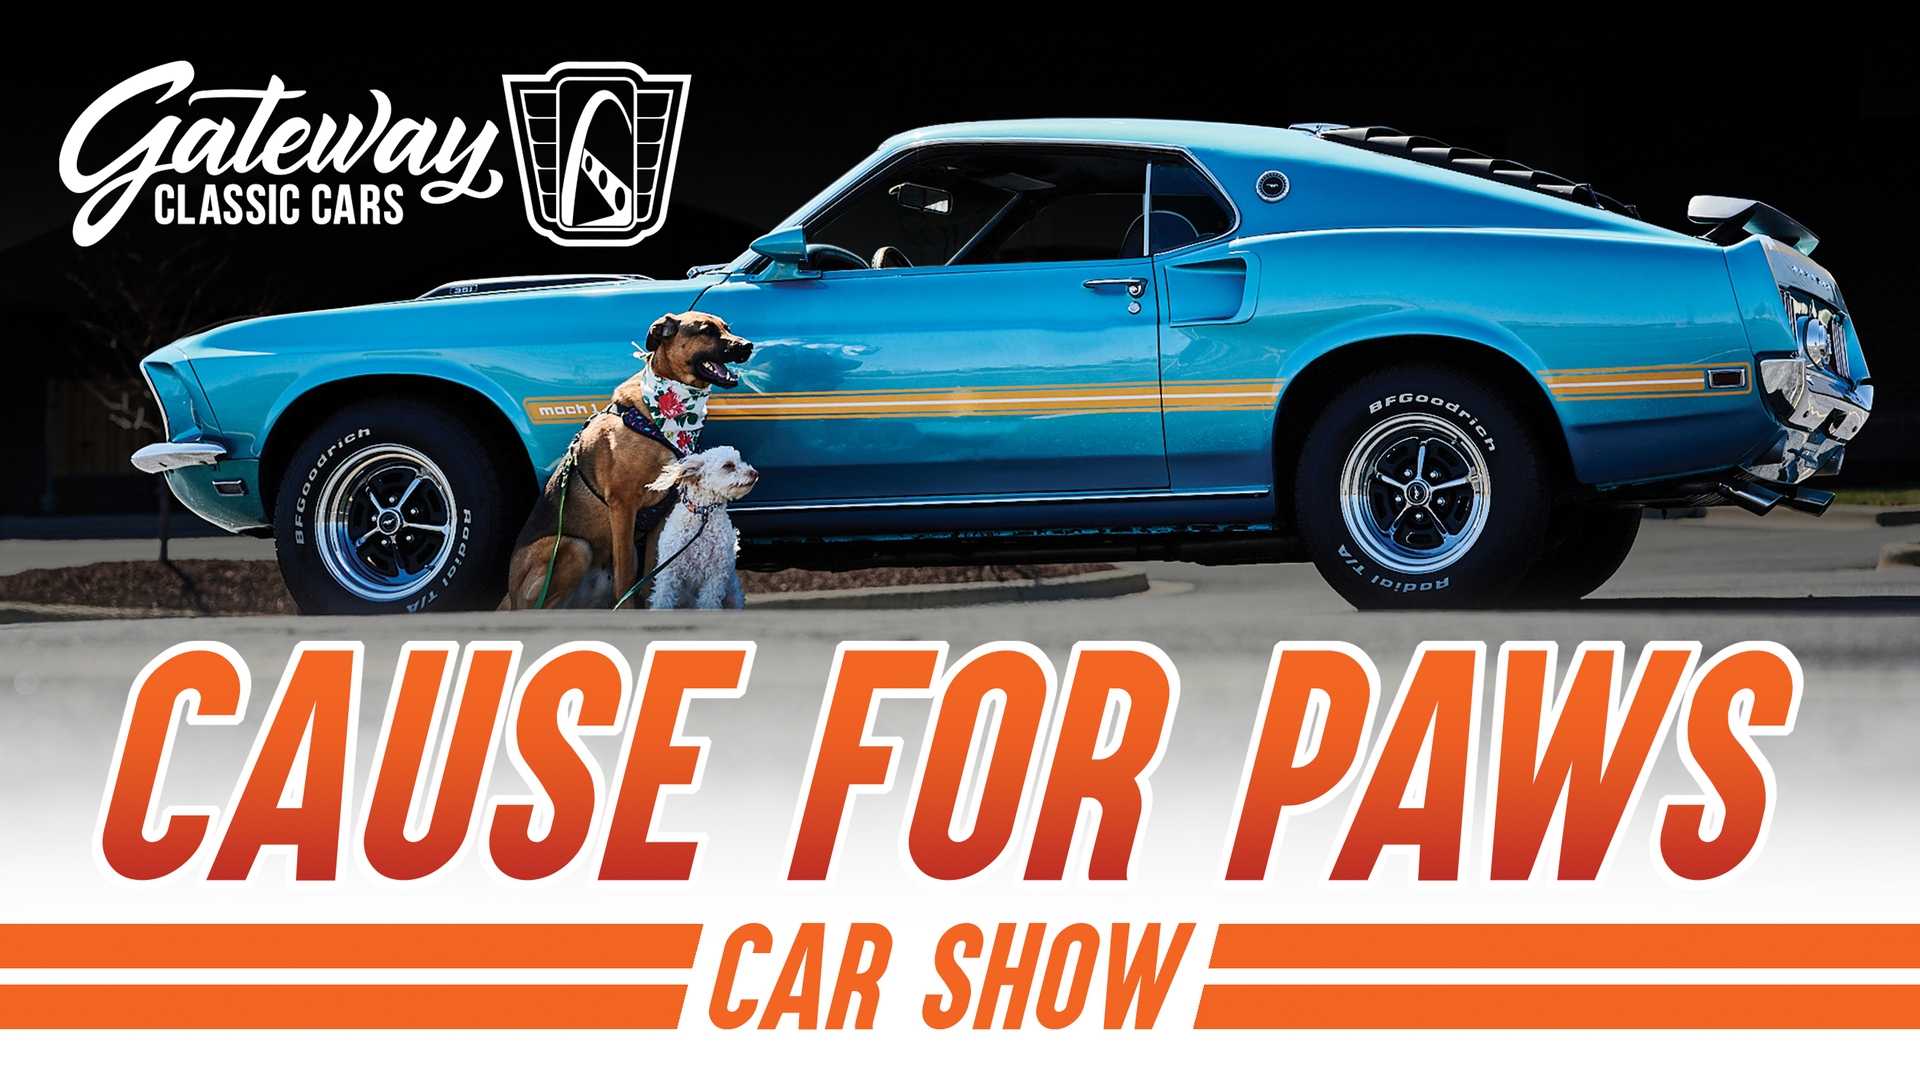 Cause for Paws at Caffeine and Chrome, Gateway Classic Cars of Louisville, Memphis, Indiana, United States